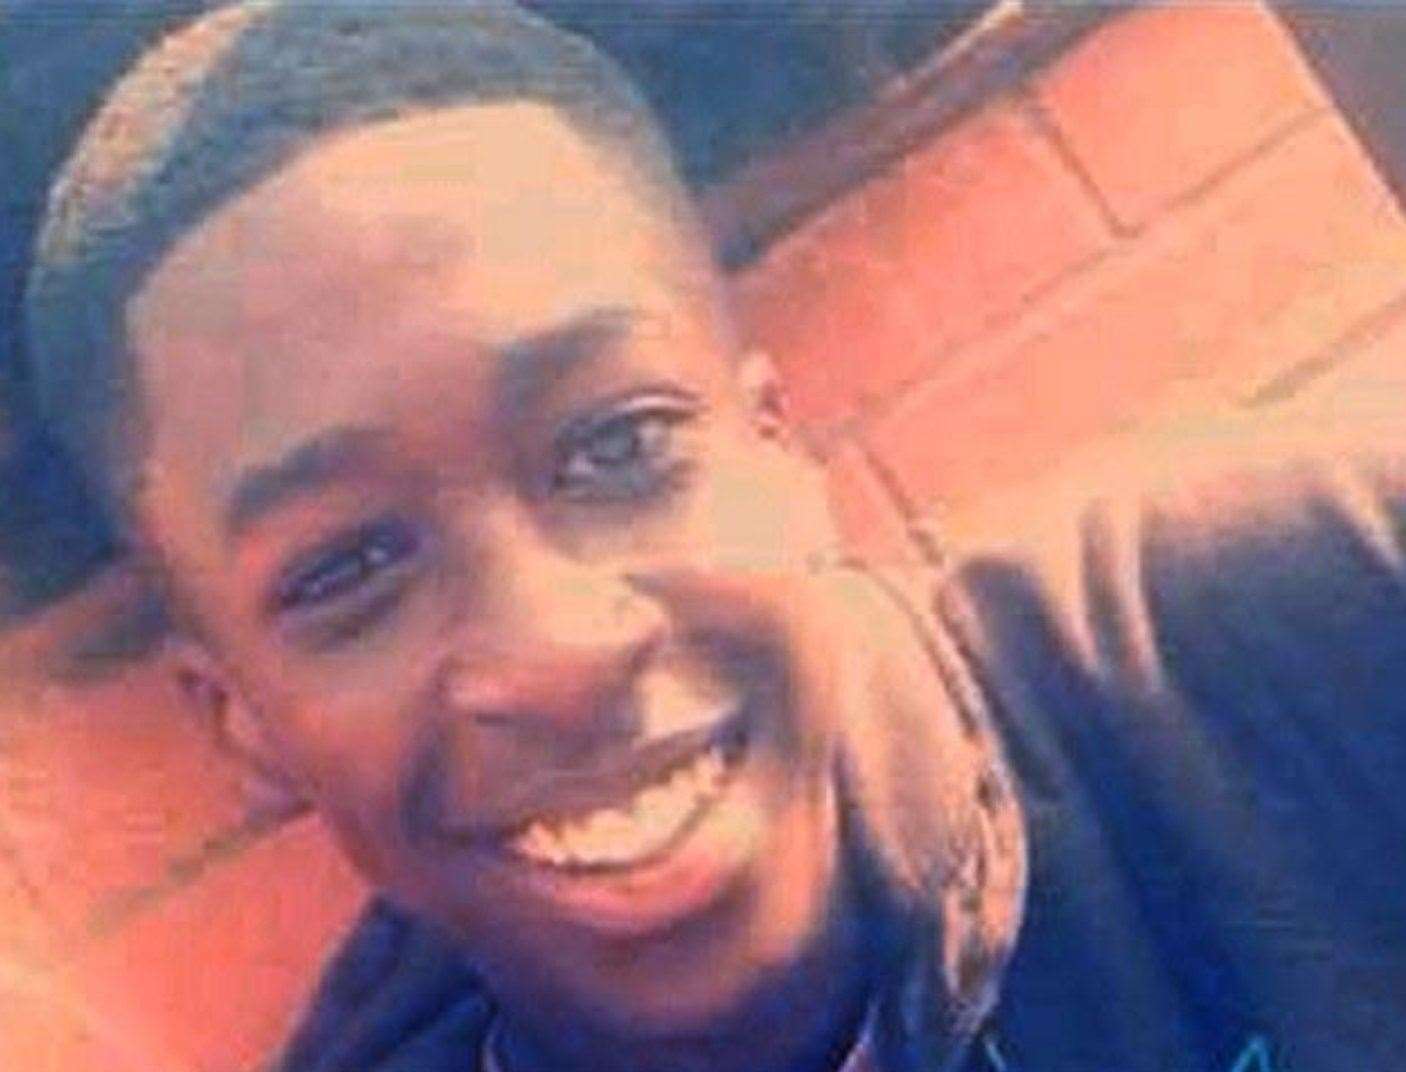 Jaydon McFarlane died of his wounds